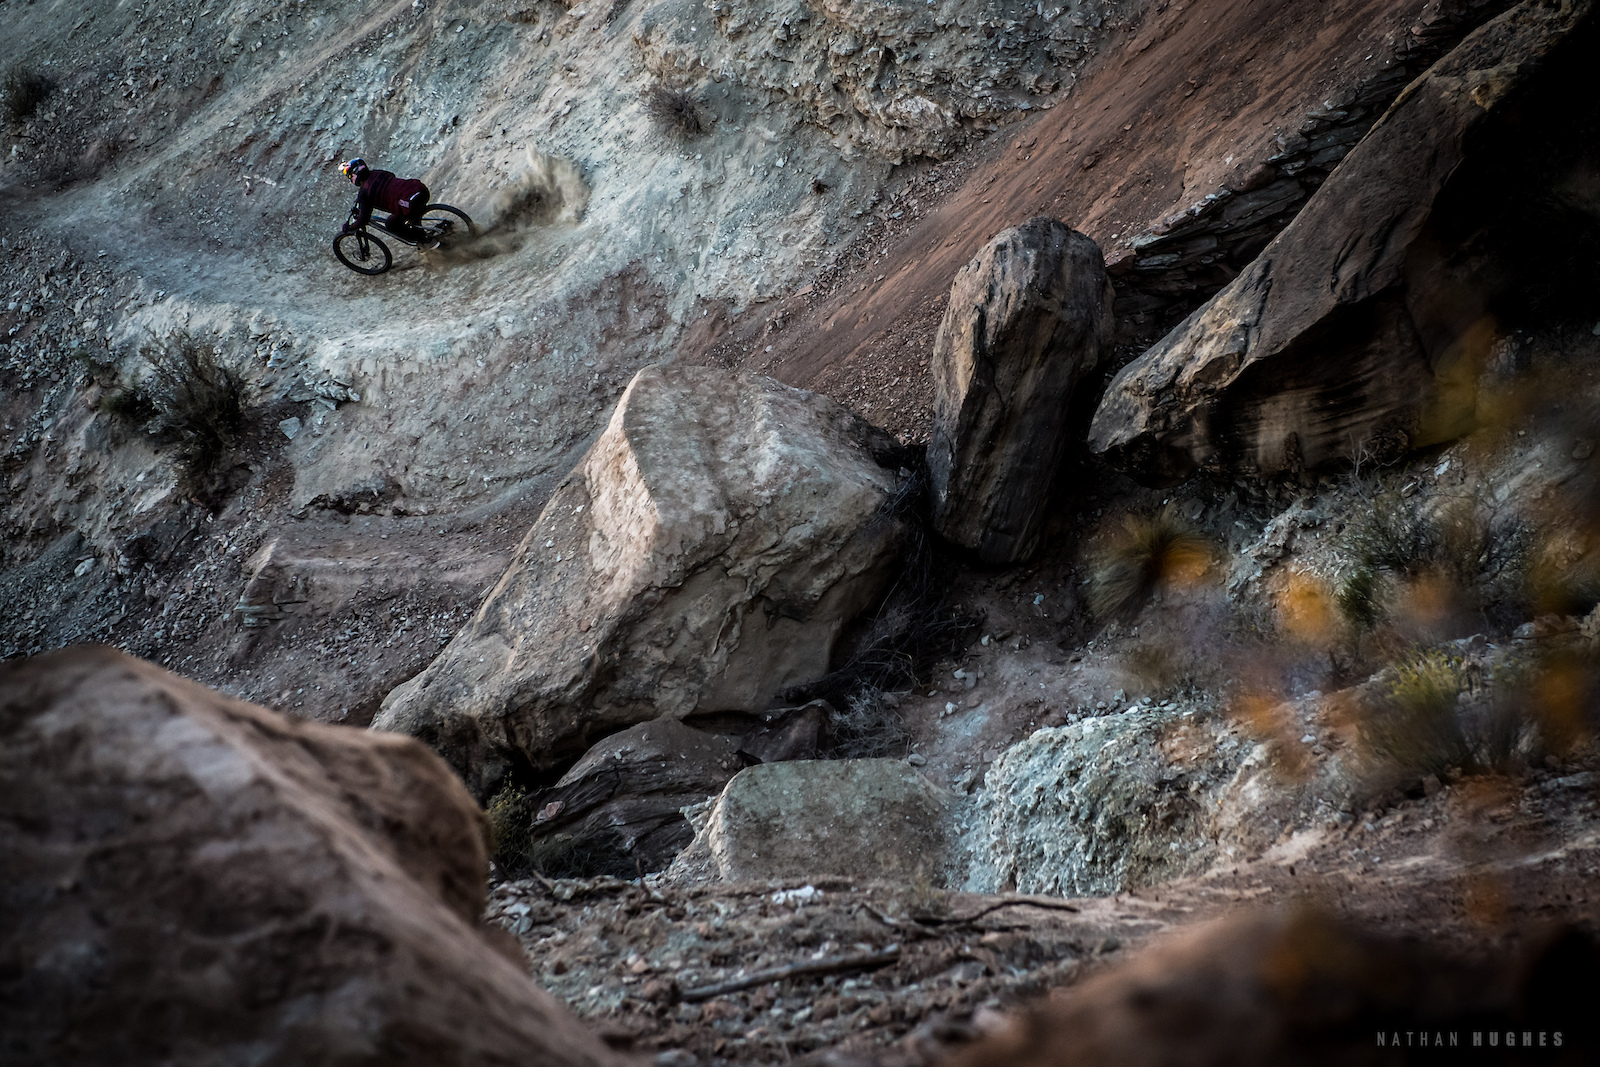 B-Sem slaying his rock tapper and roosting into the next section.